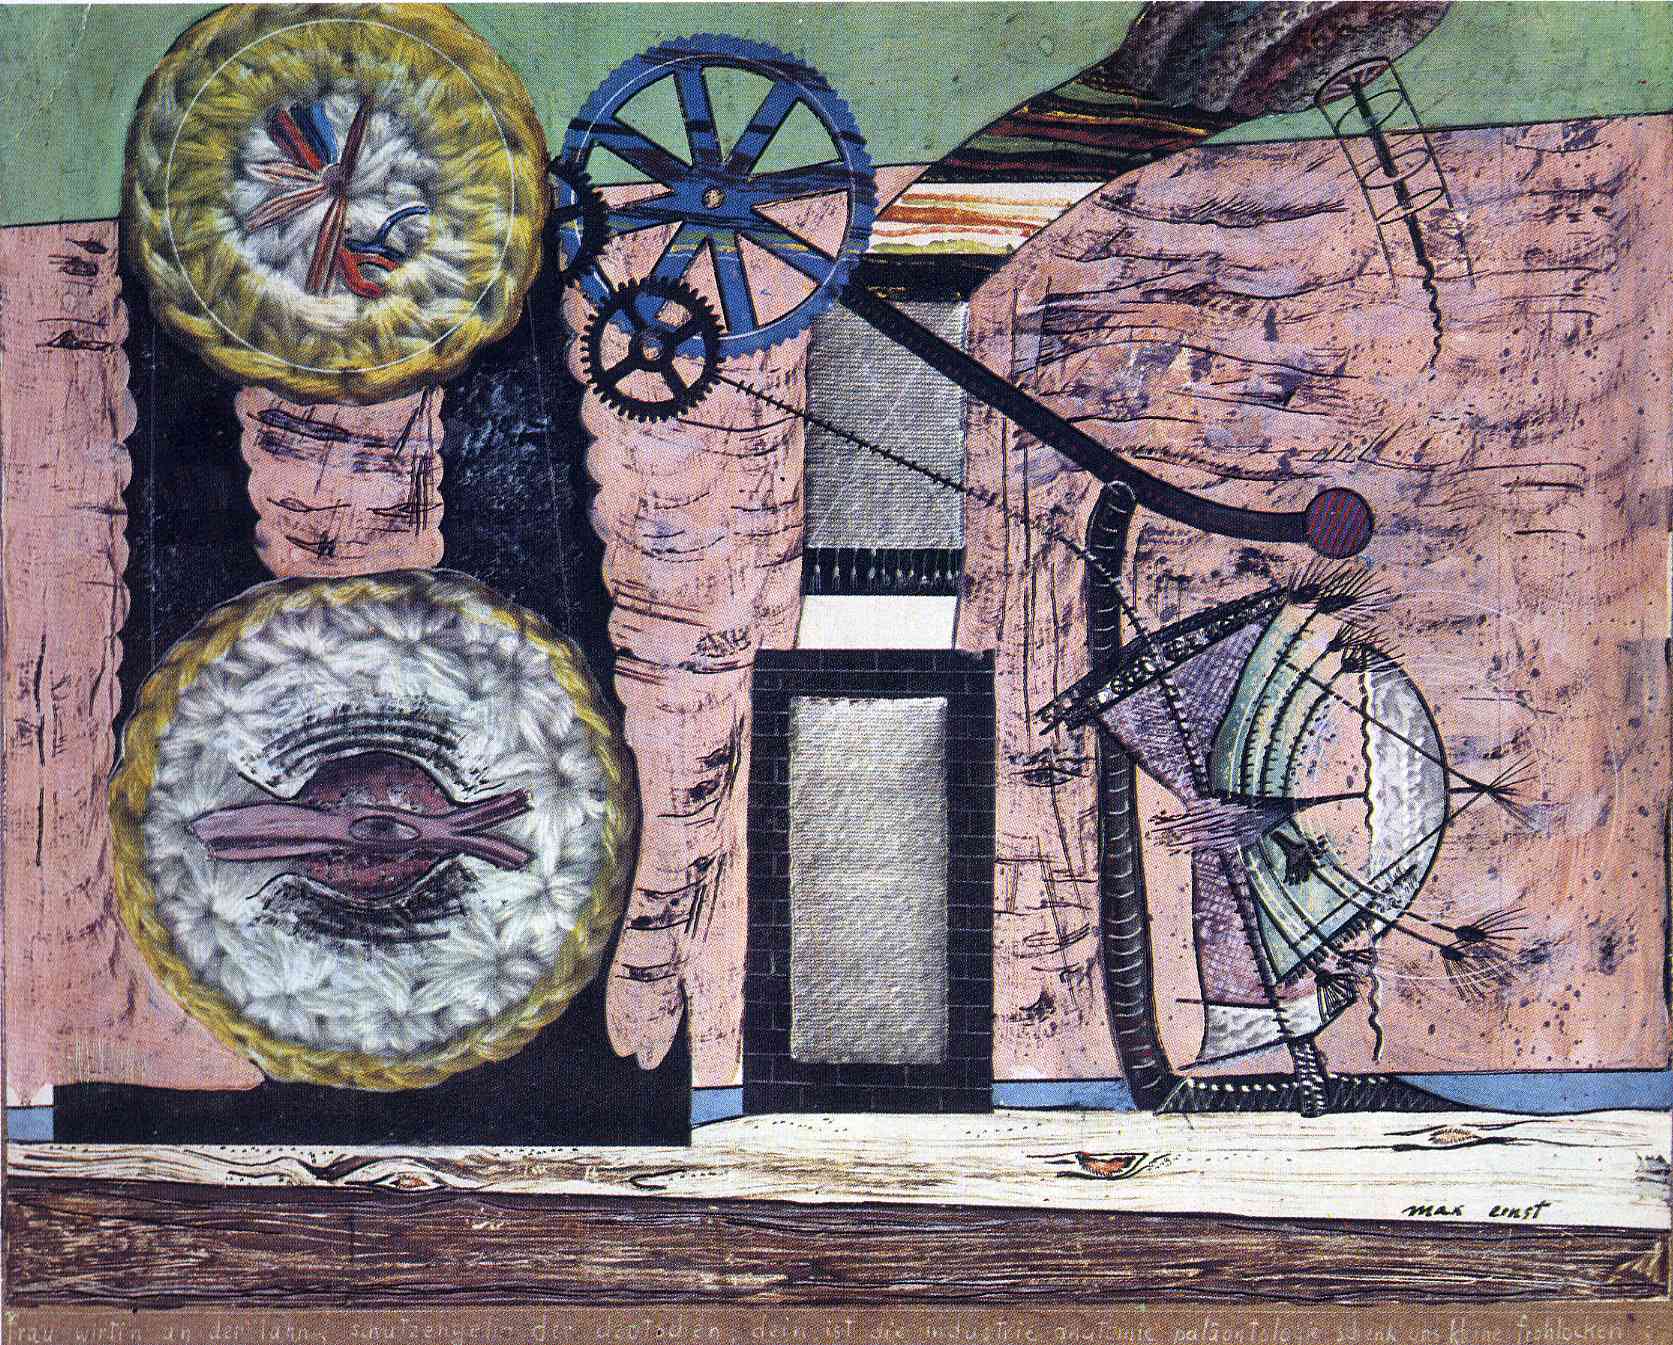 Untitled, c.1920 - Max Ernst - WikiArt.org